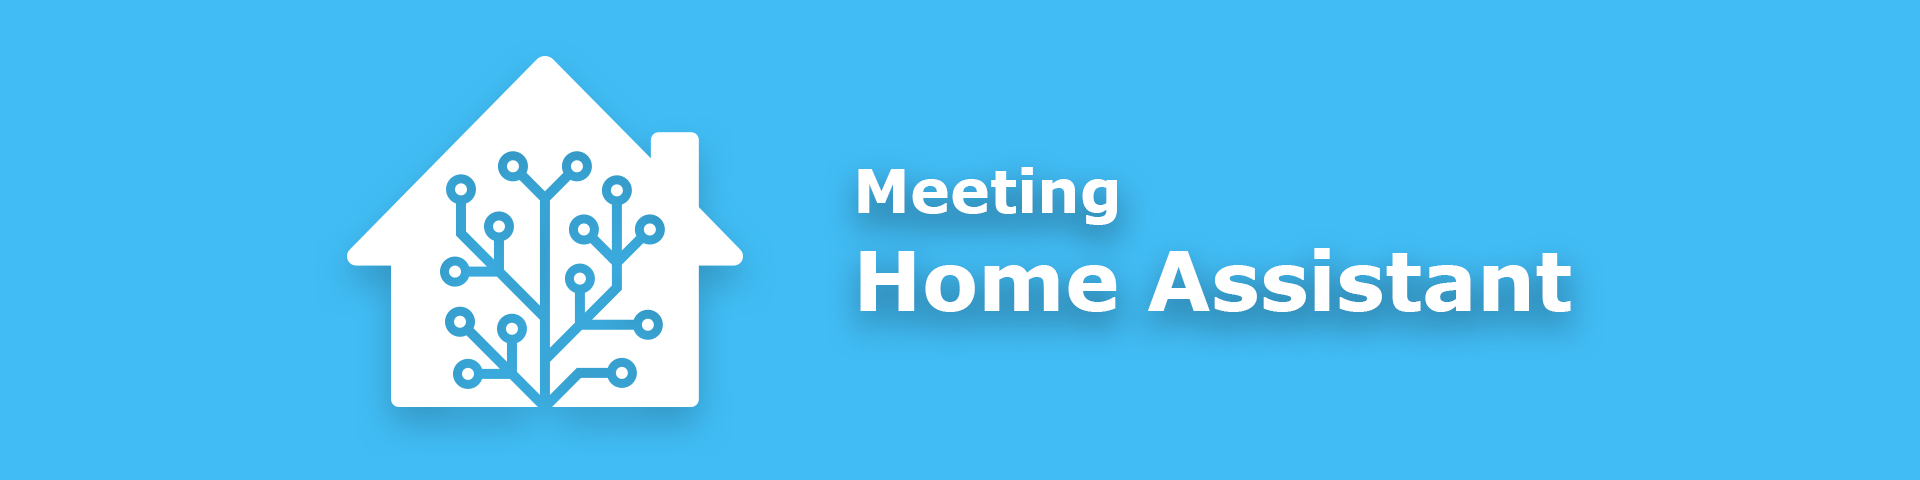 Meeting Home Assistant